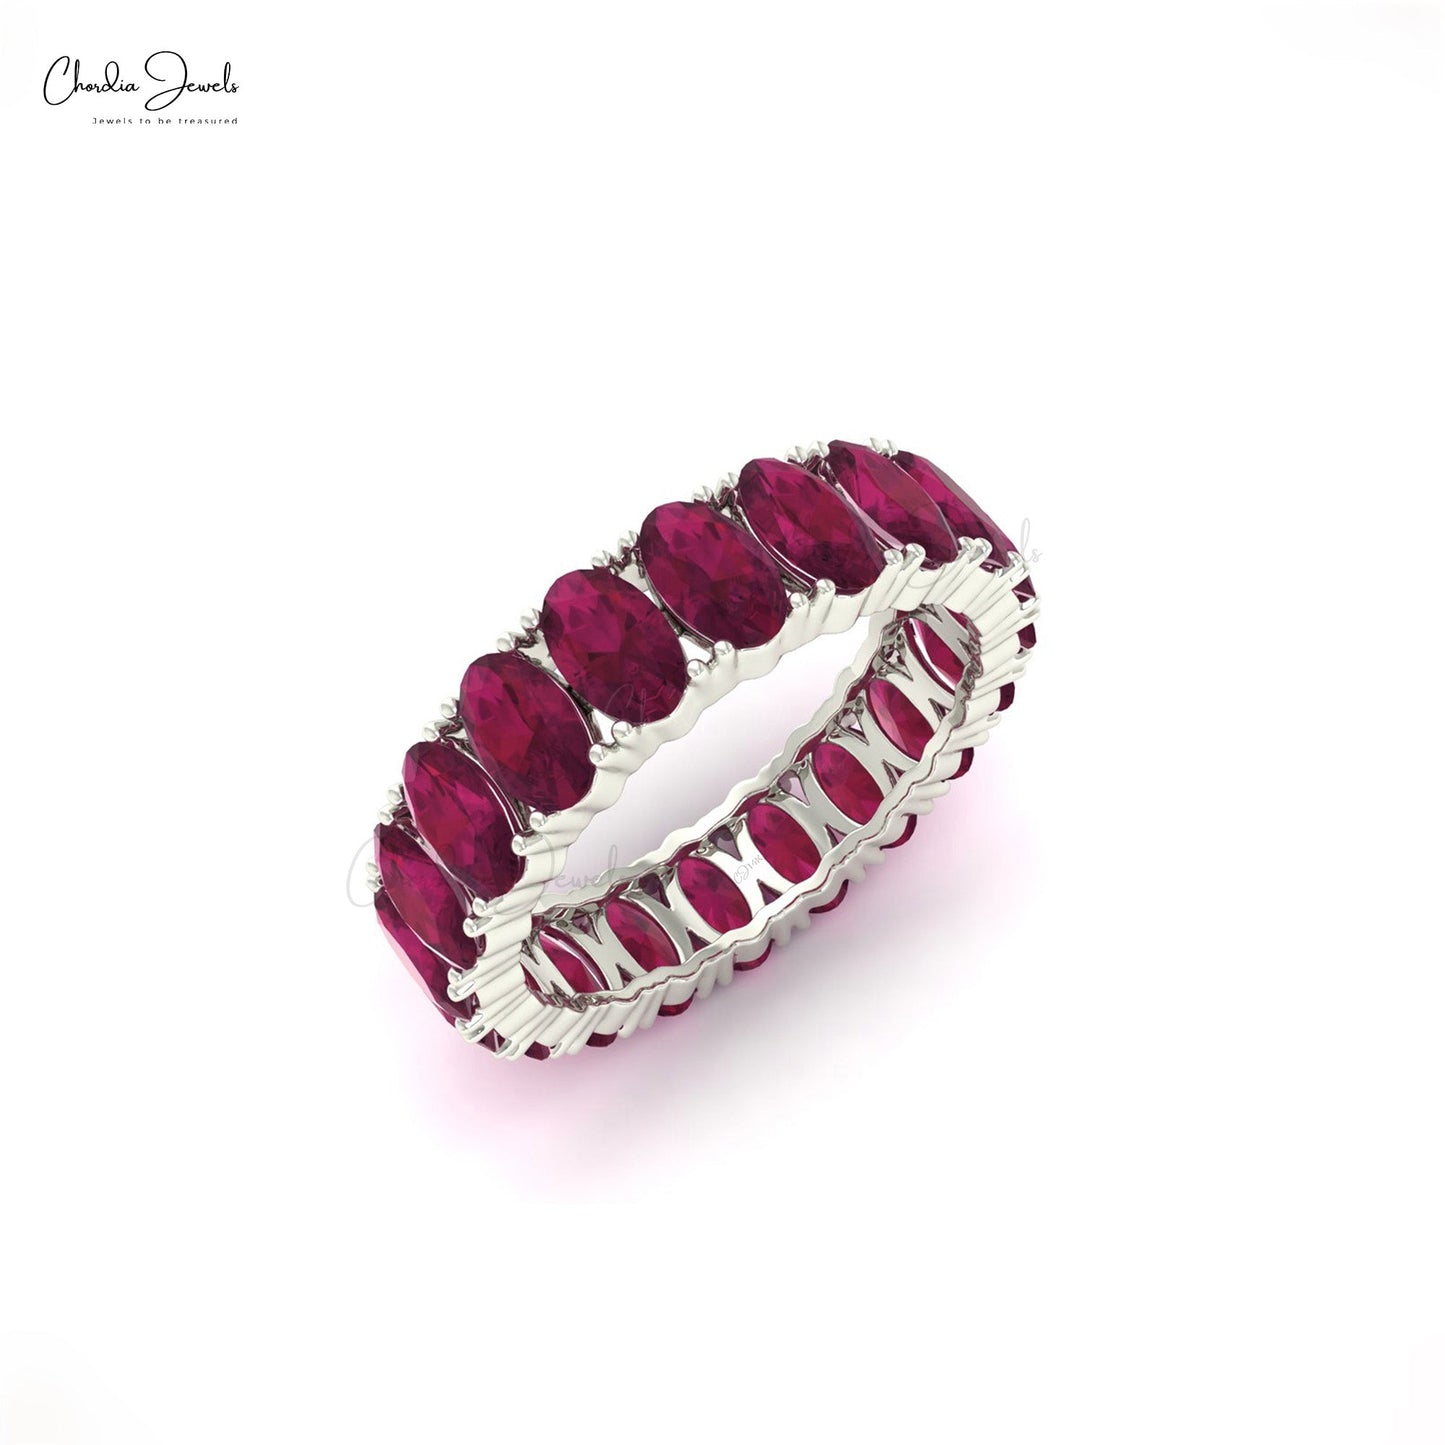 Natural Ruby Full Eternity Band, 14k Solid Gold Ruby Eternity Ring, 5x3 Oval Cut Handmade Gemstone Ring, Gift For Her